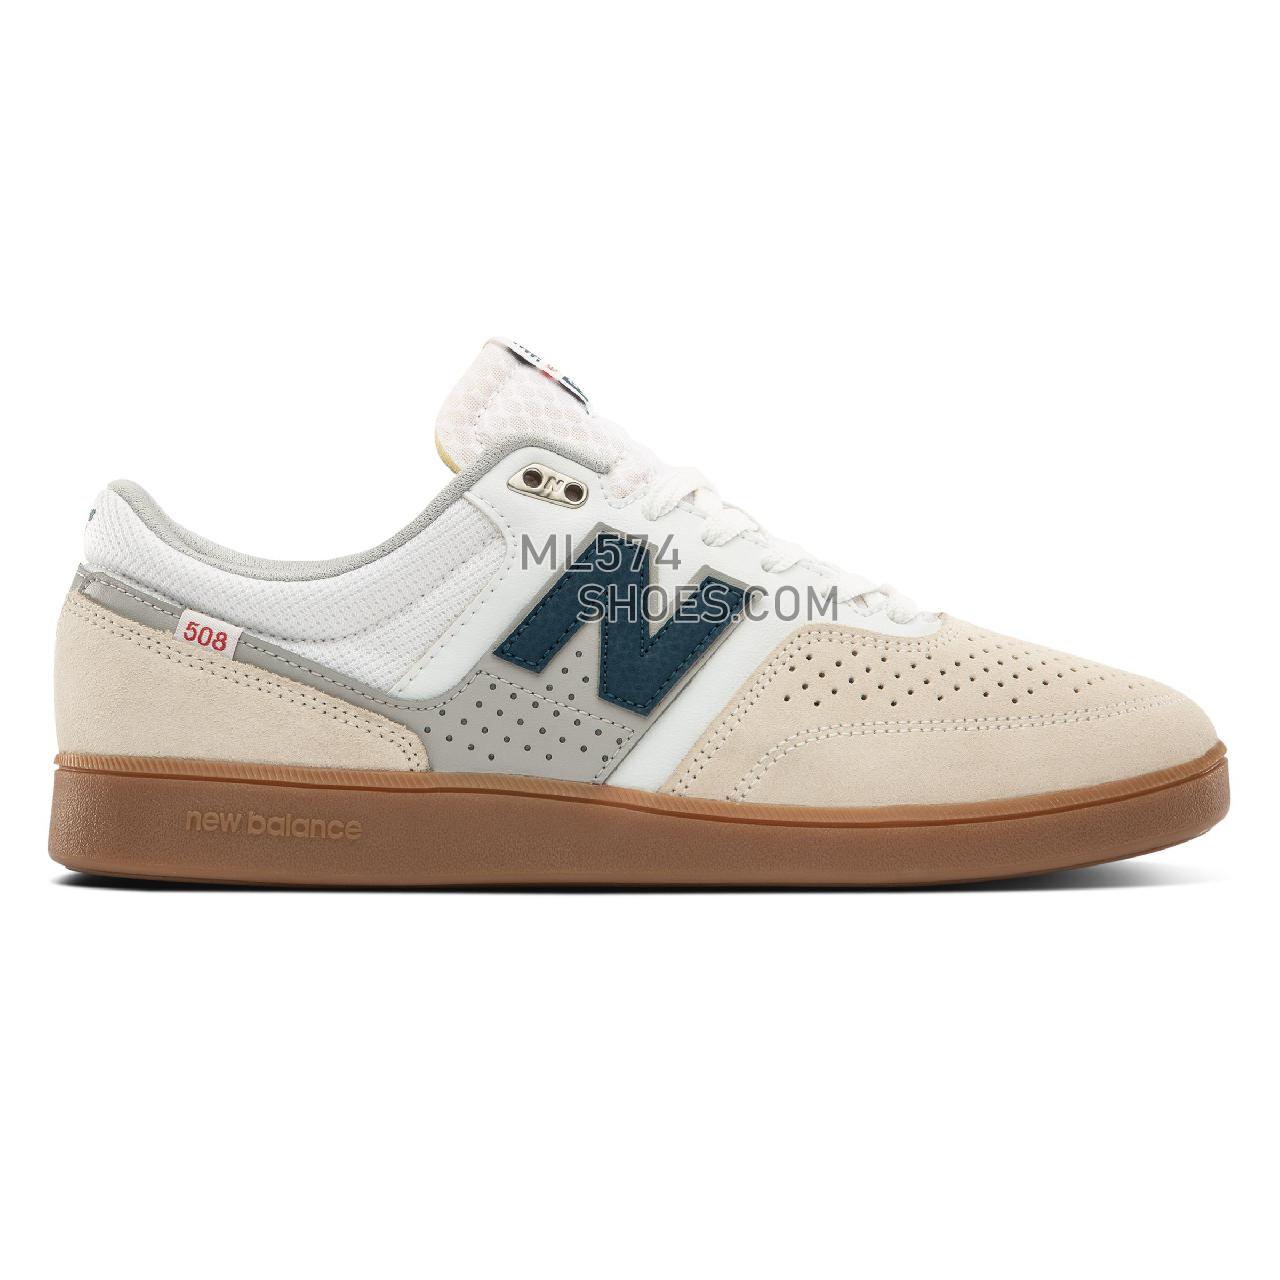 New Balance Numeric NM508 - Men's NB Numeric Skate - White with Blue and Grey - NM508WHB